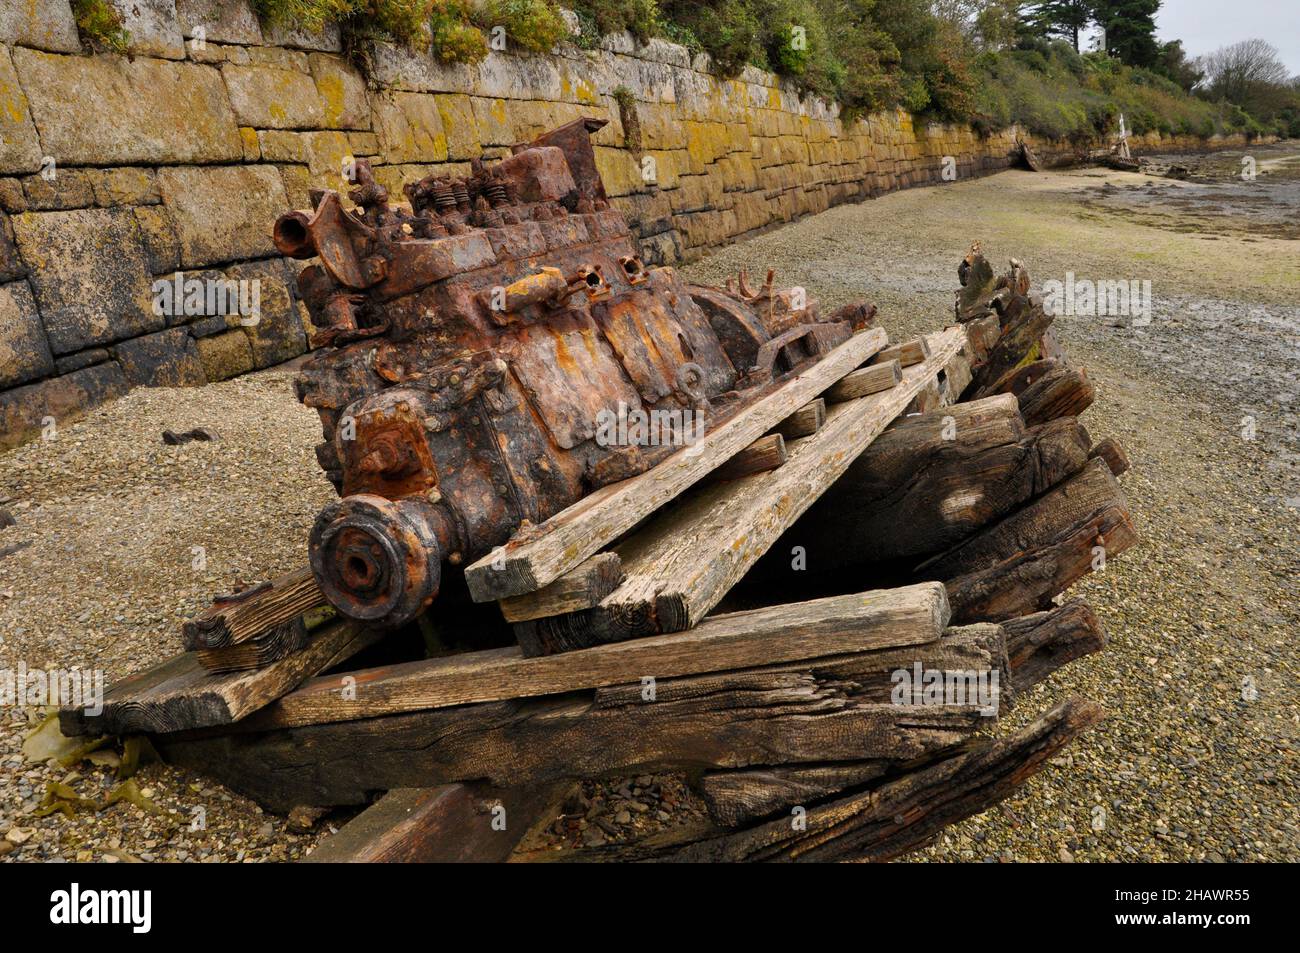 Remains of the engine and keel of a wrecked wooden boat on the foreshore in the tidal estuary of the river Hayle nr St.Ives in Cornwall, UK Stock Photo